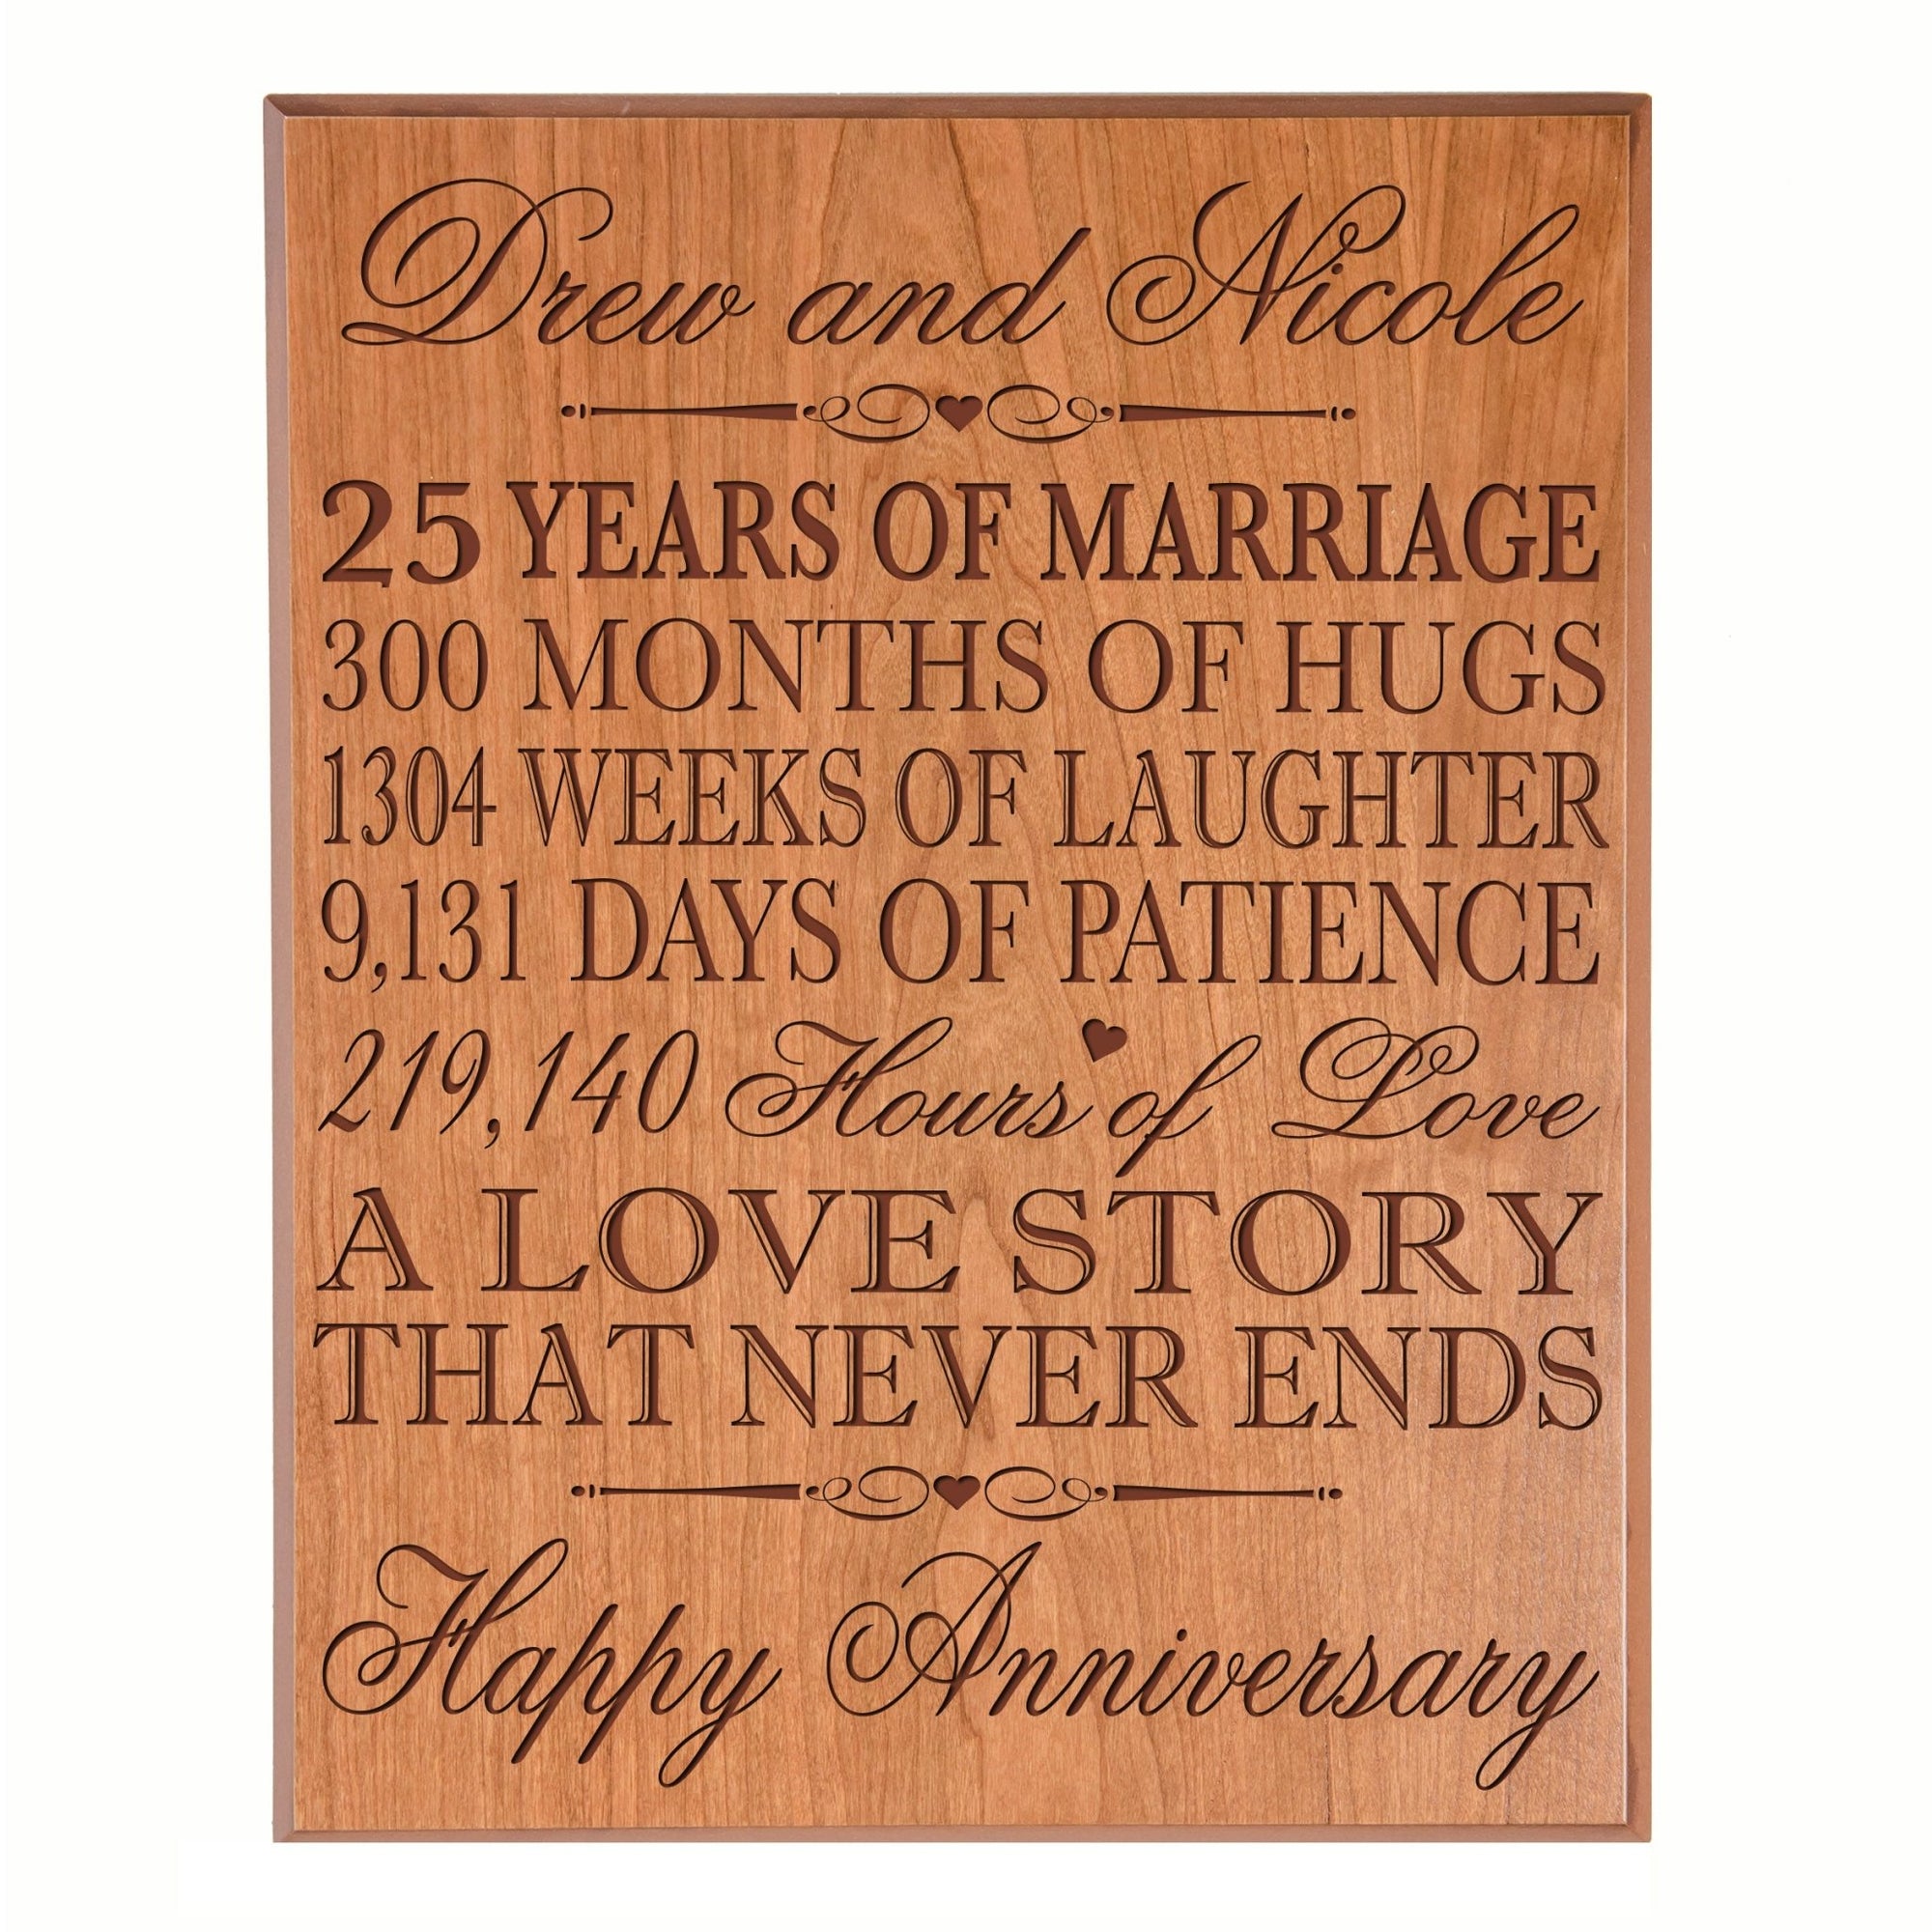 Anniversary Wall Plaque - Our Life Together - LifeSong Milestones